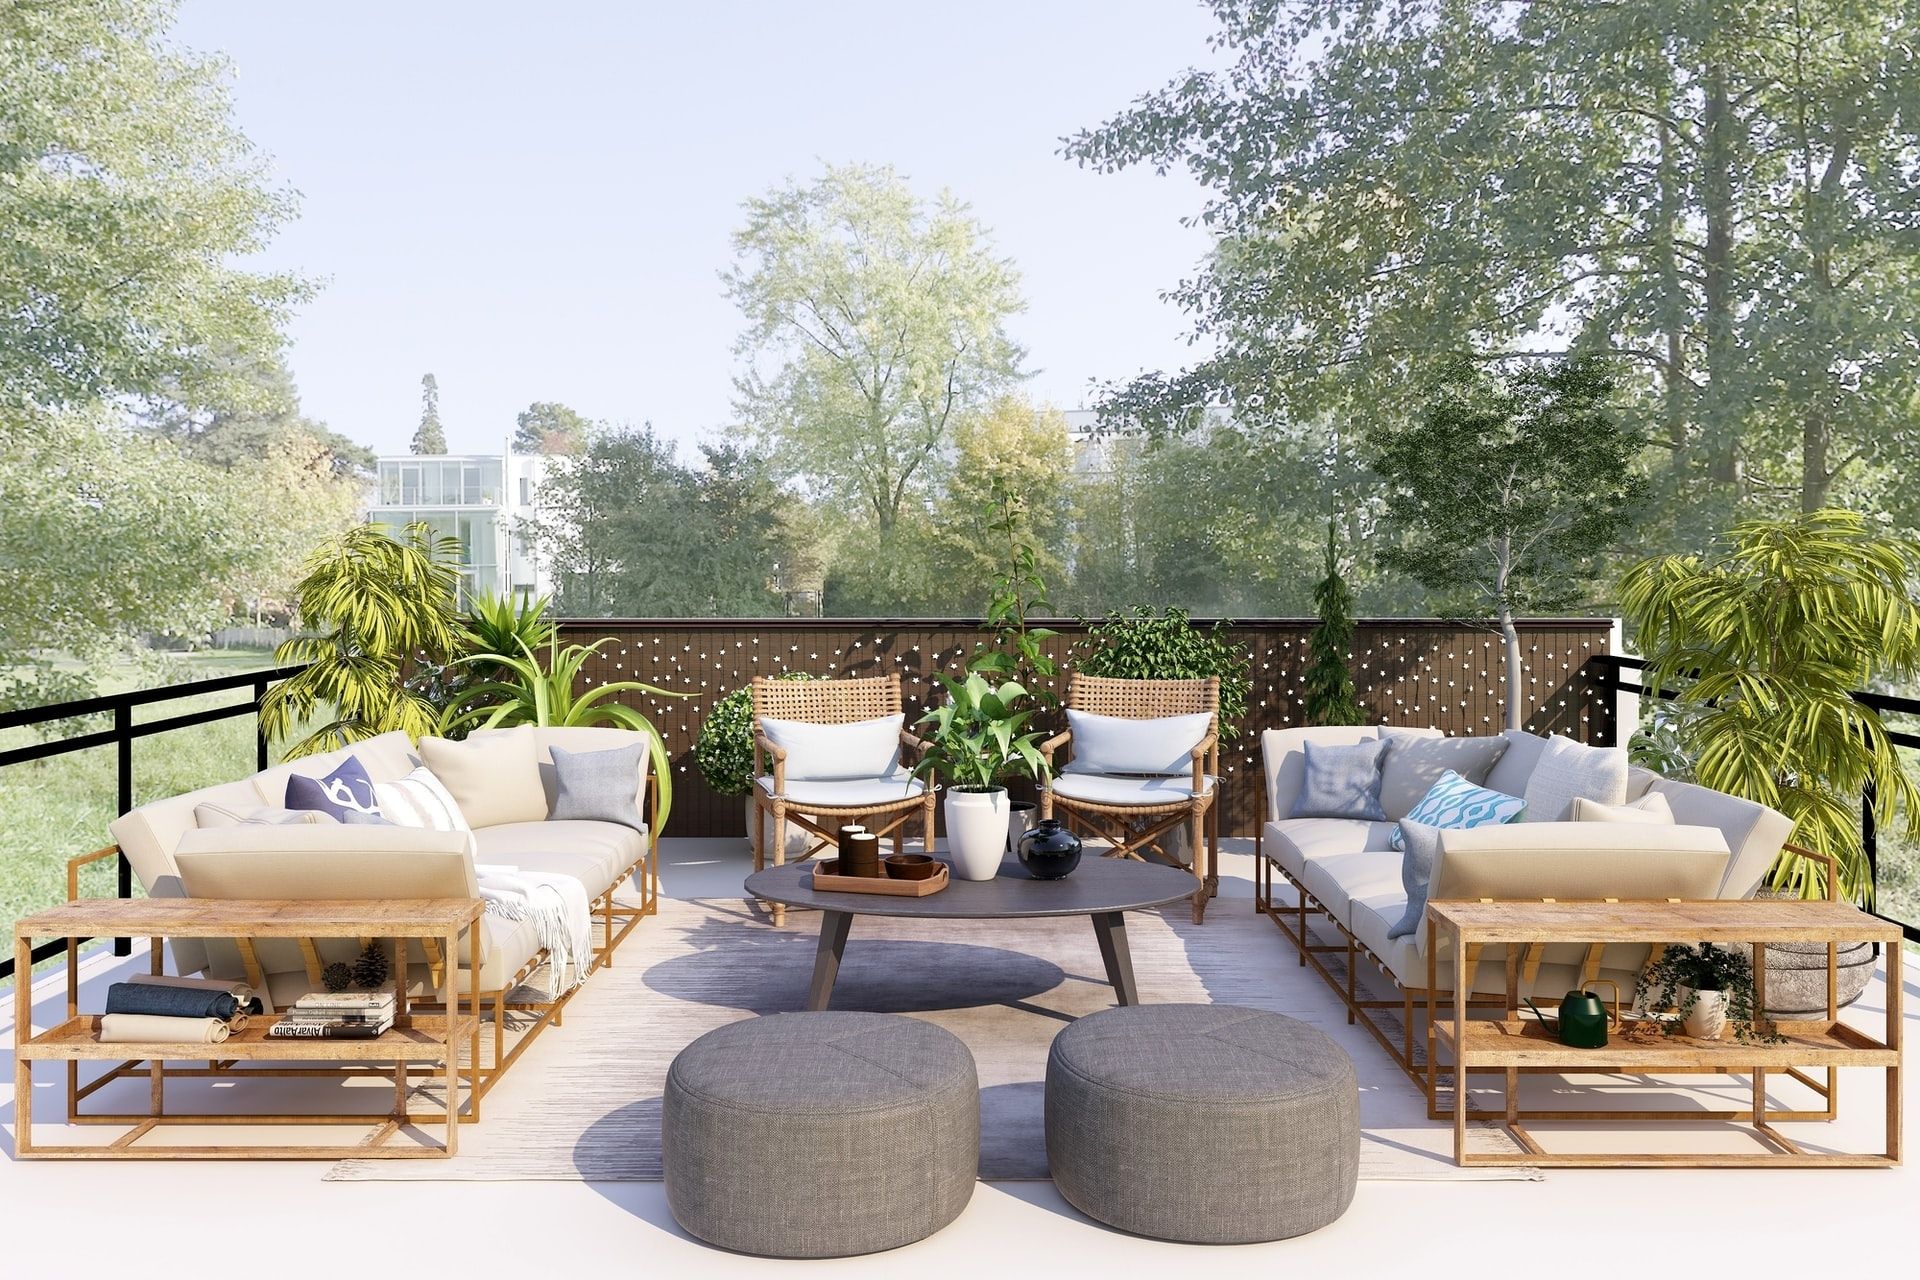 10 Enchanting Deck Furniture Ideas for a Comfy Outdoor Rest